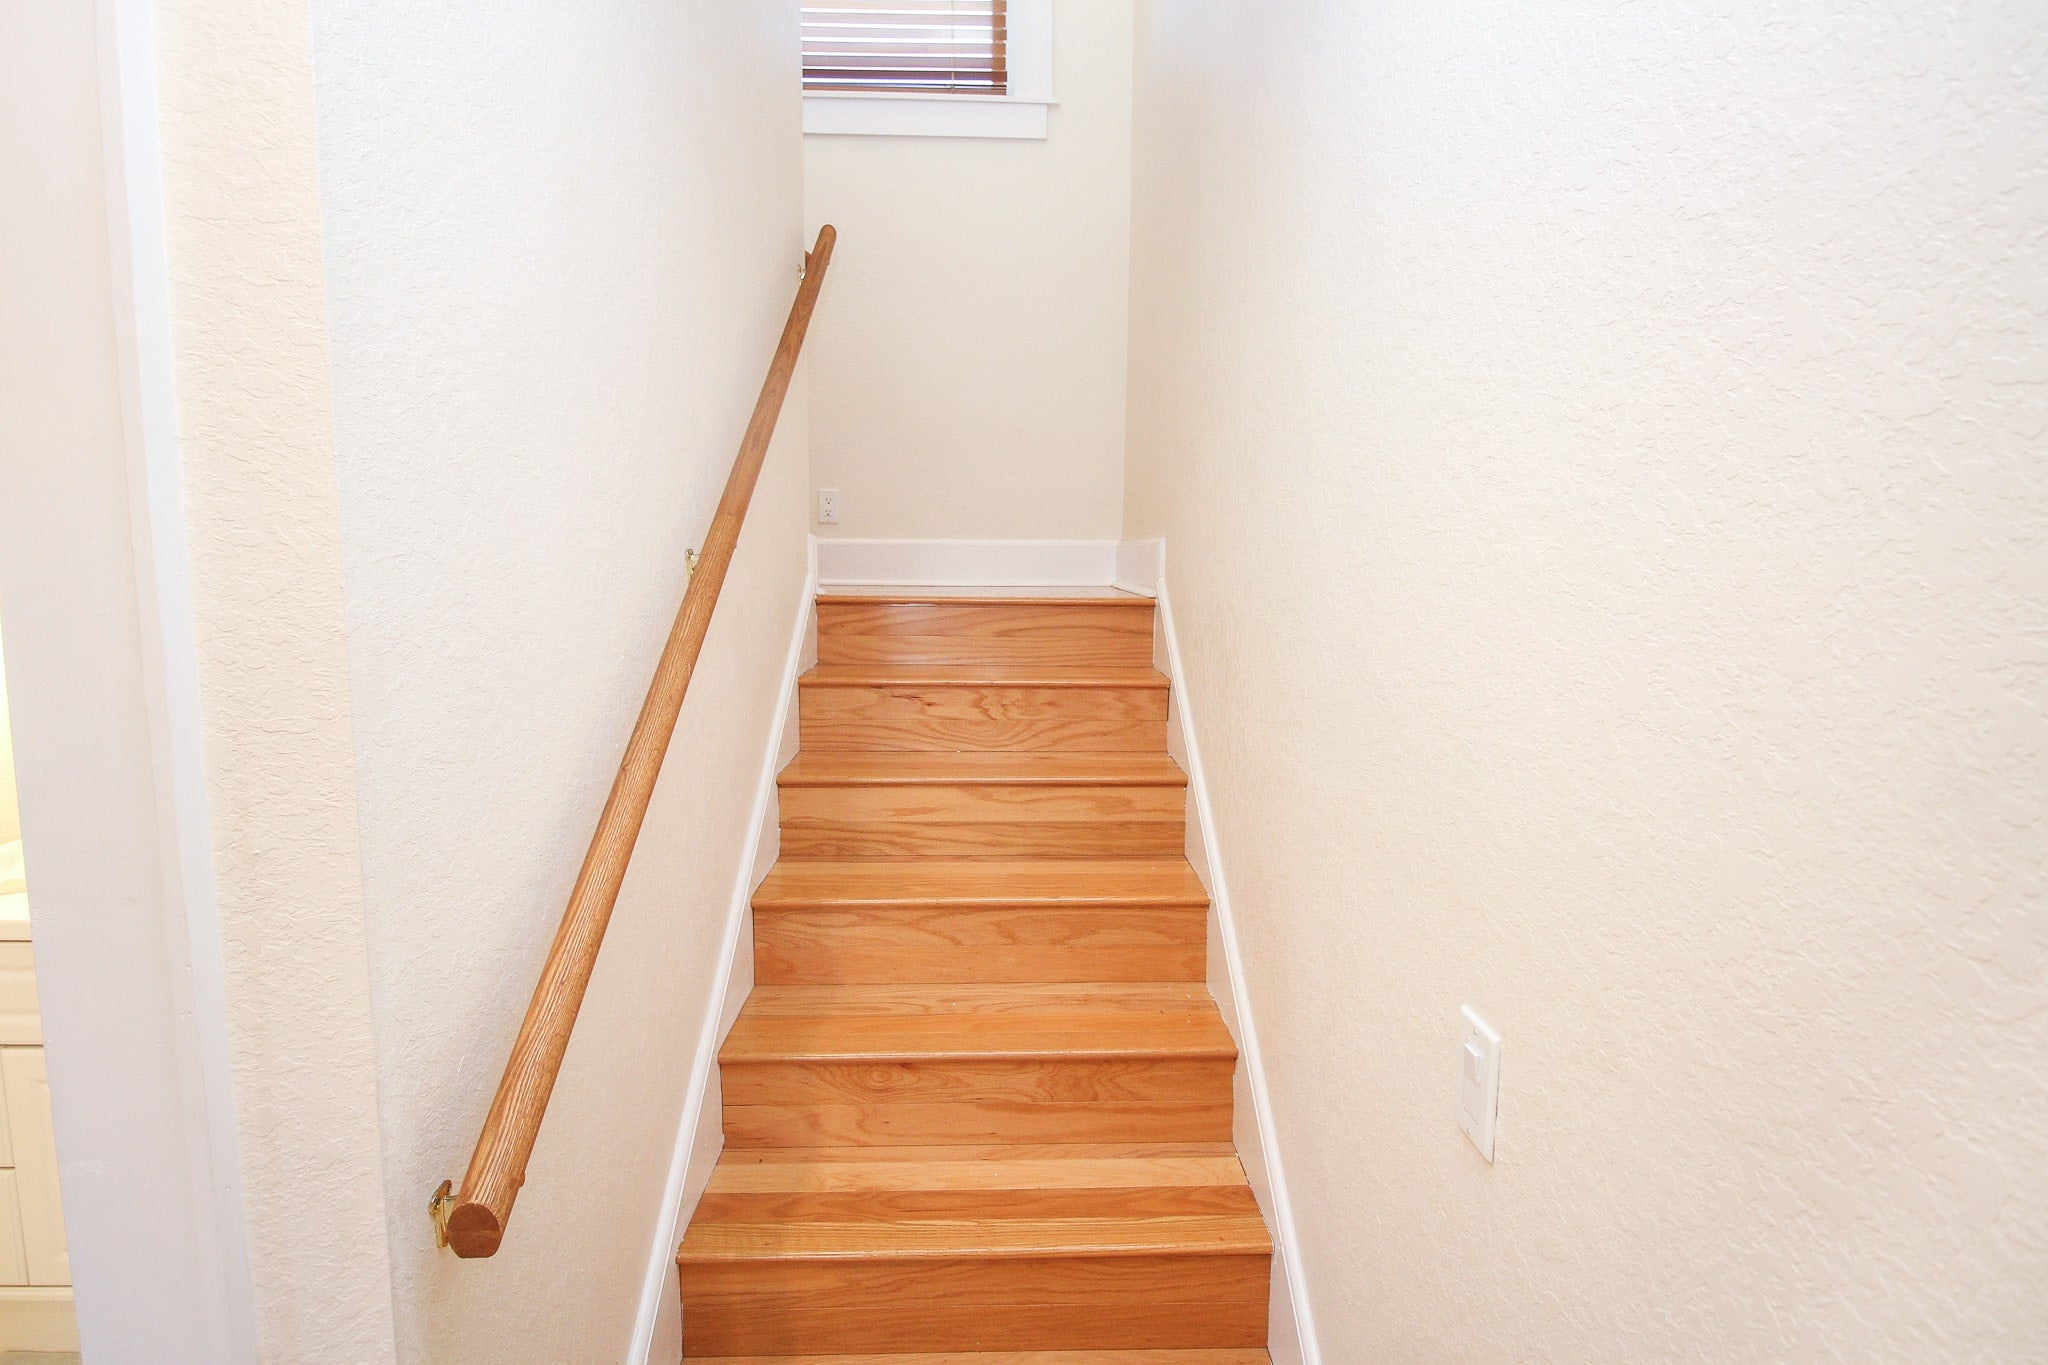 Stairs lead to loft